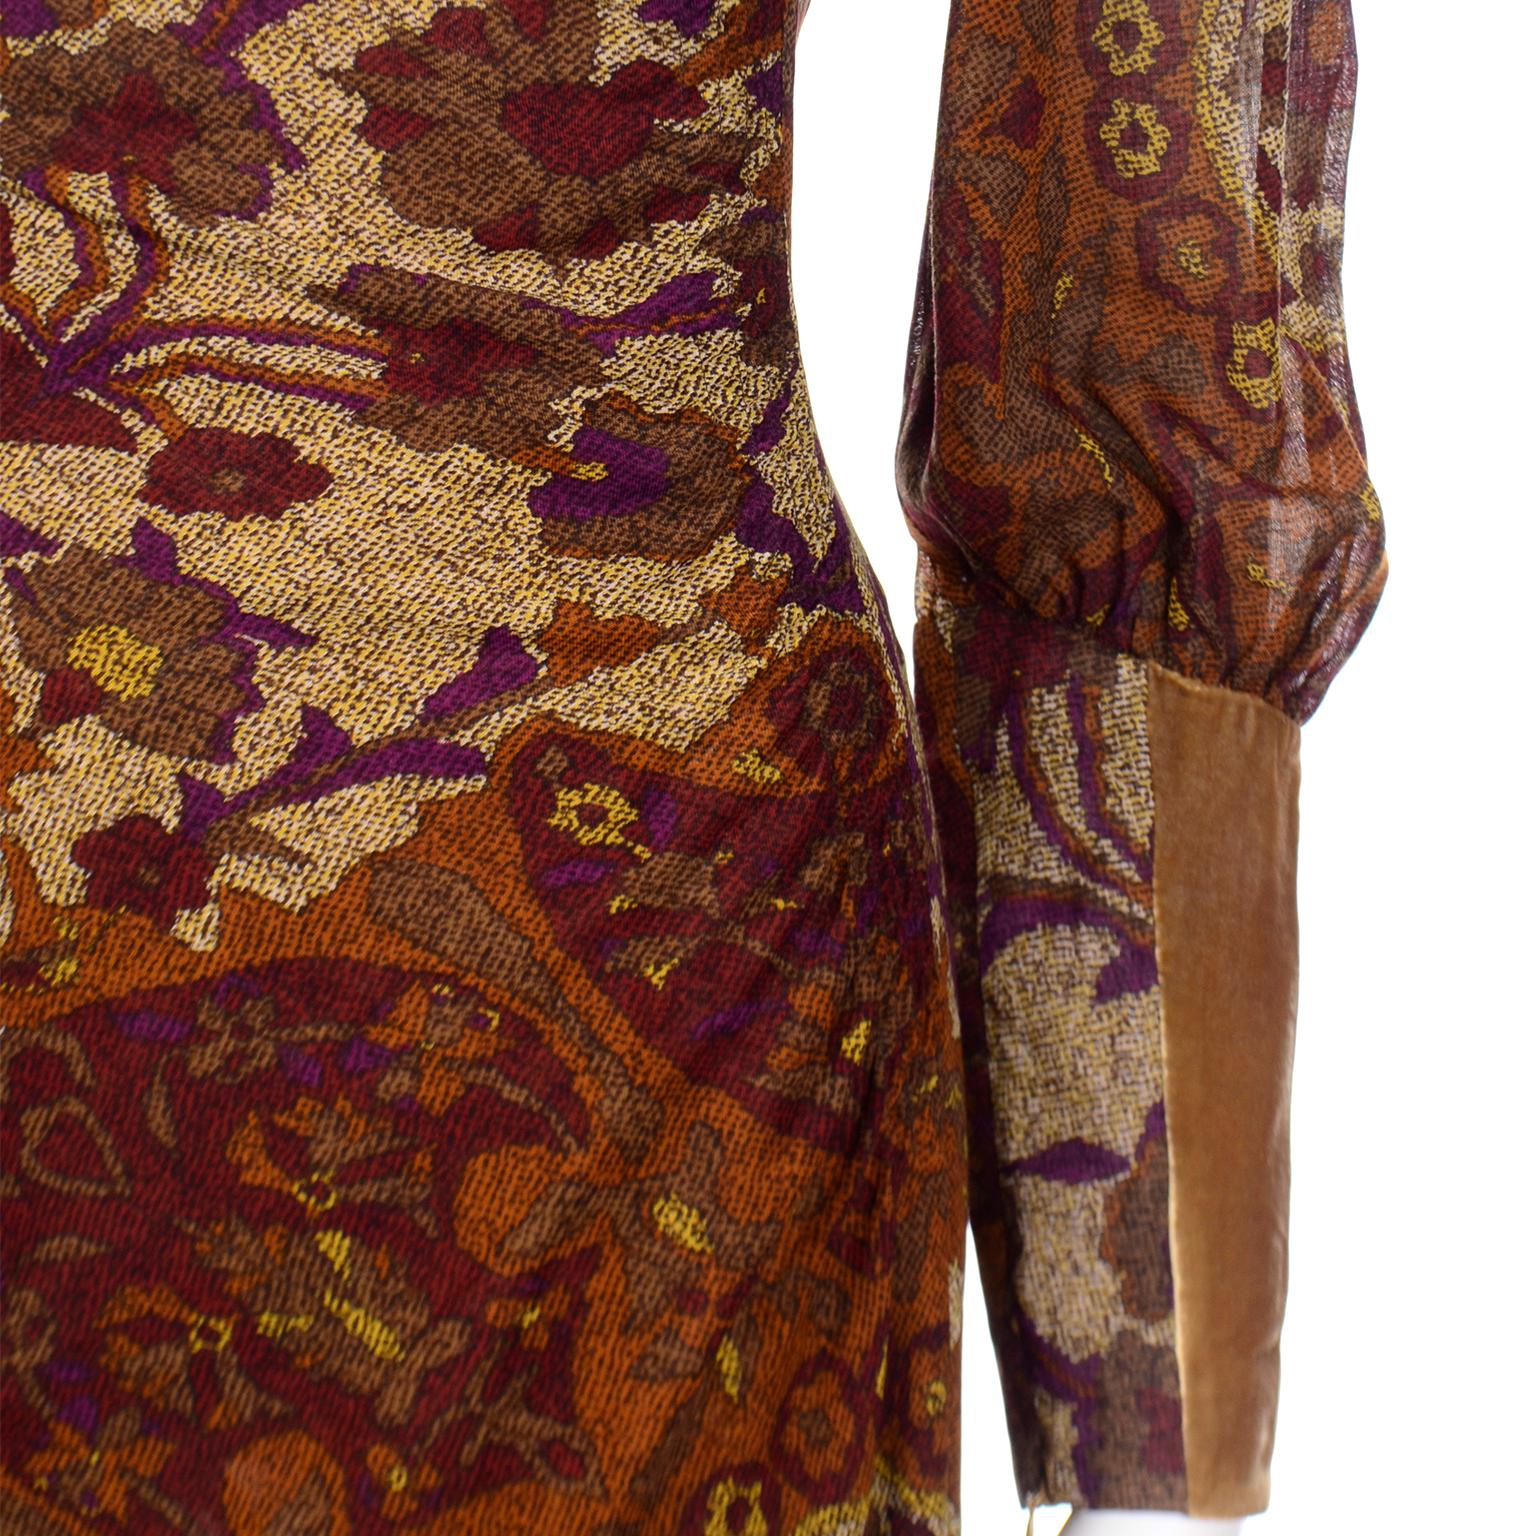 Kenzo Vintage Lush Plum Brown and Gold Floral Print Dress w Gold Velvet Trim For Sale 5